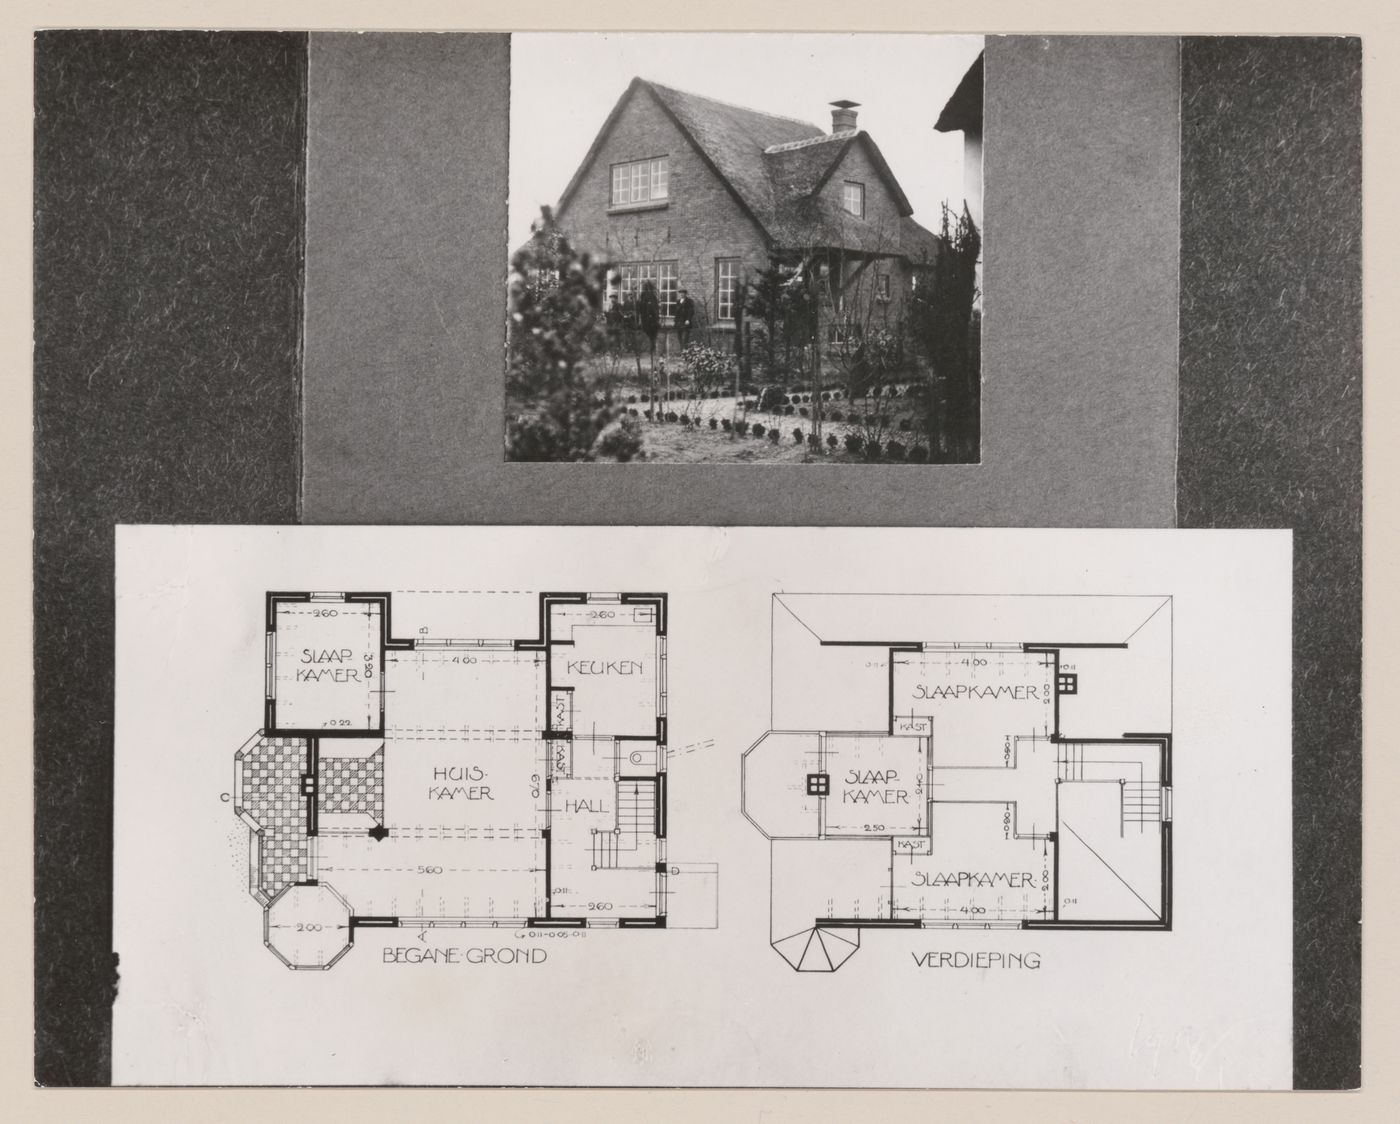 Photograph of floor plans for a house for Mr. and Mrs. van Essen-Vincker and view of the house from the garden, Blaricum, Netherlands